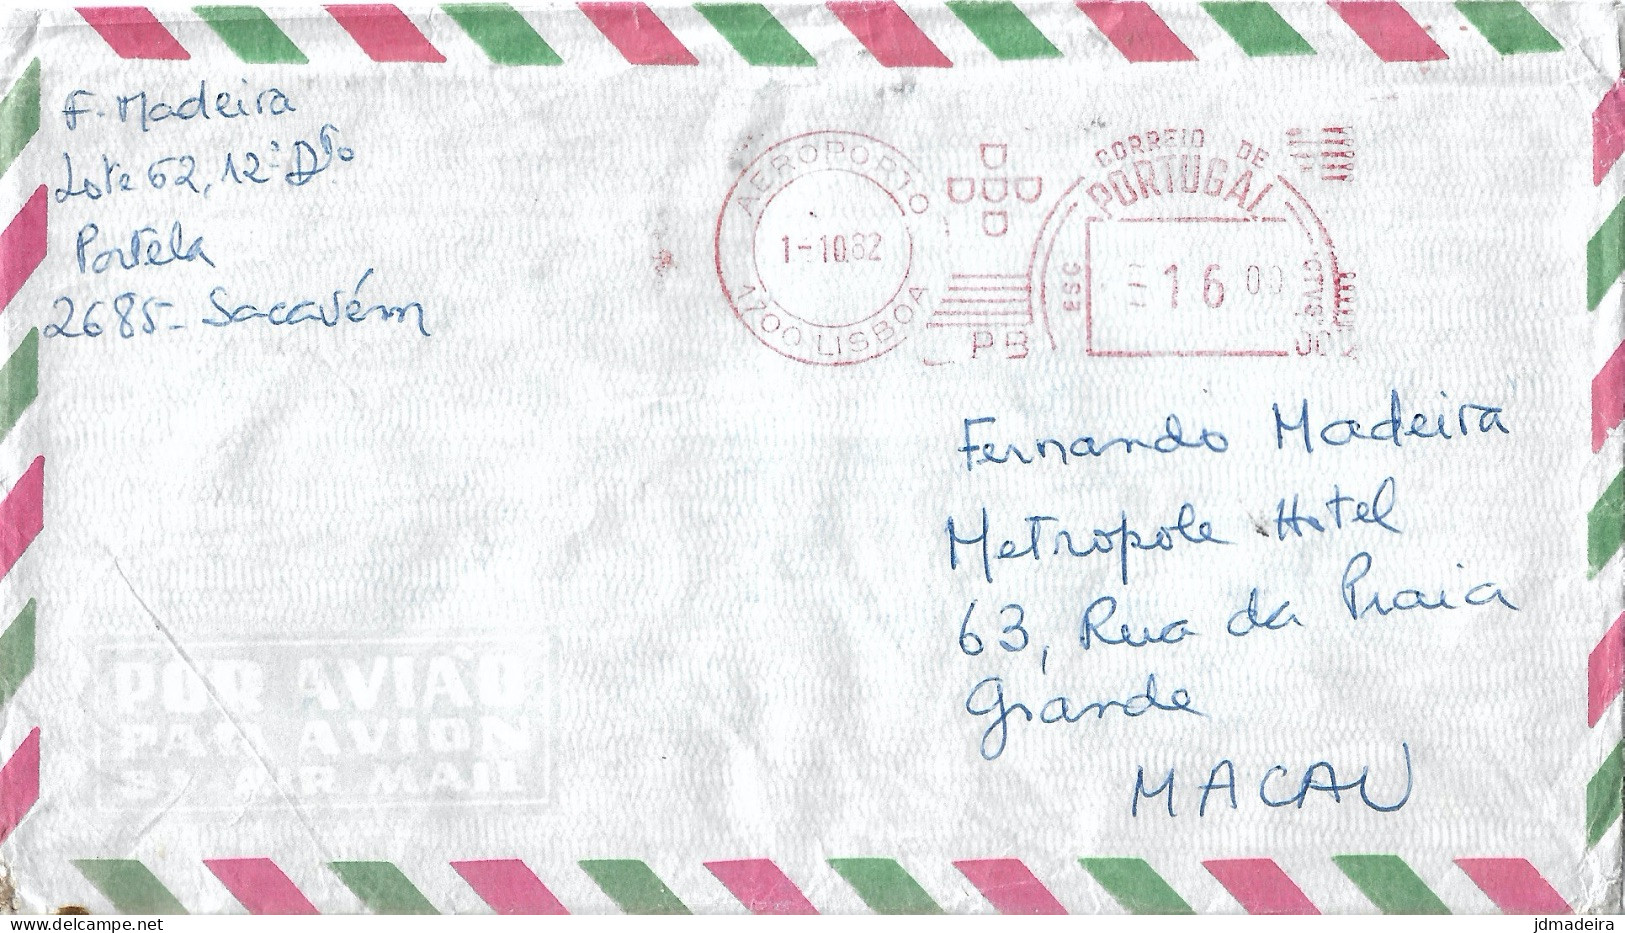 MACAU MACAO Incoming Mail With Portugal Meter Stamp - Storia Postale